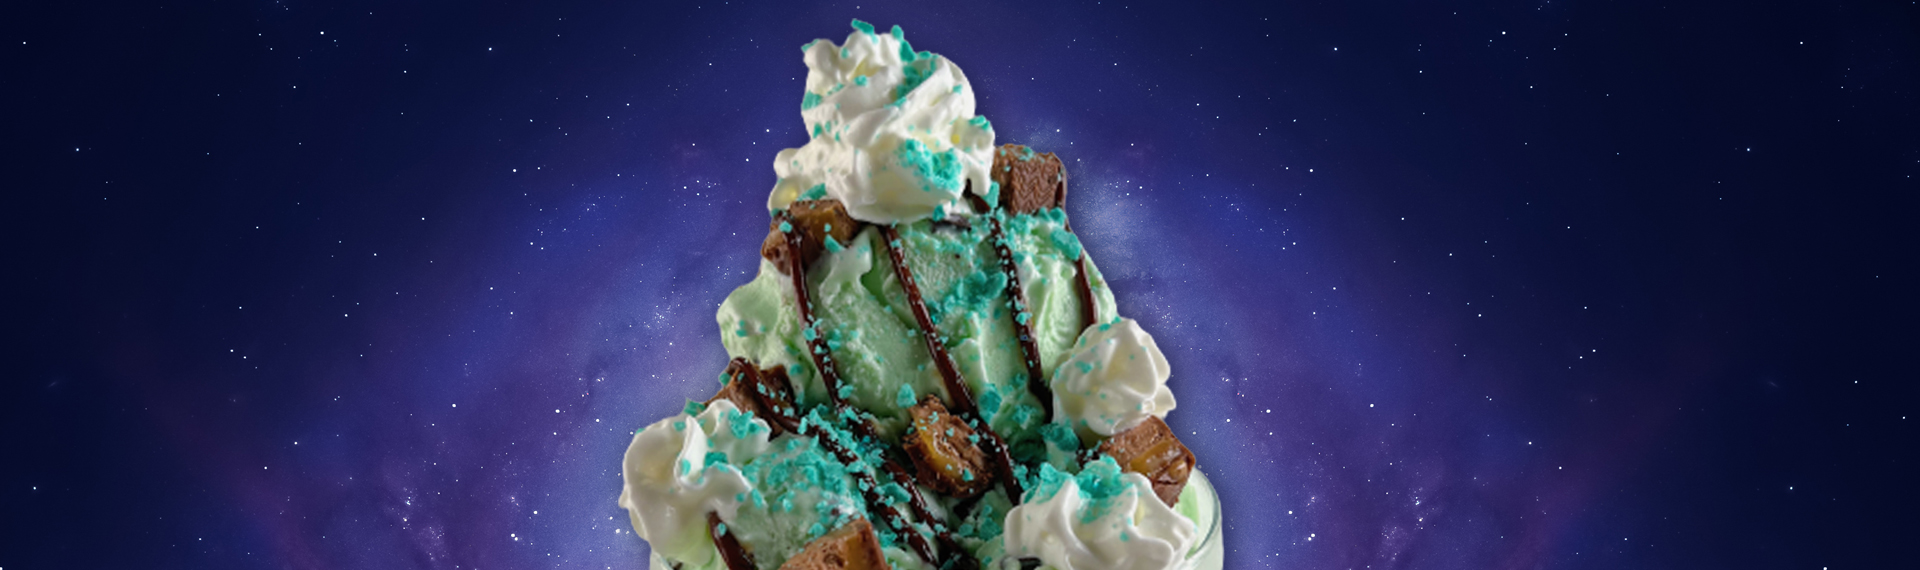 Galactic Mint Sundae *As seen on Saturday Night Live May 7, 2022.